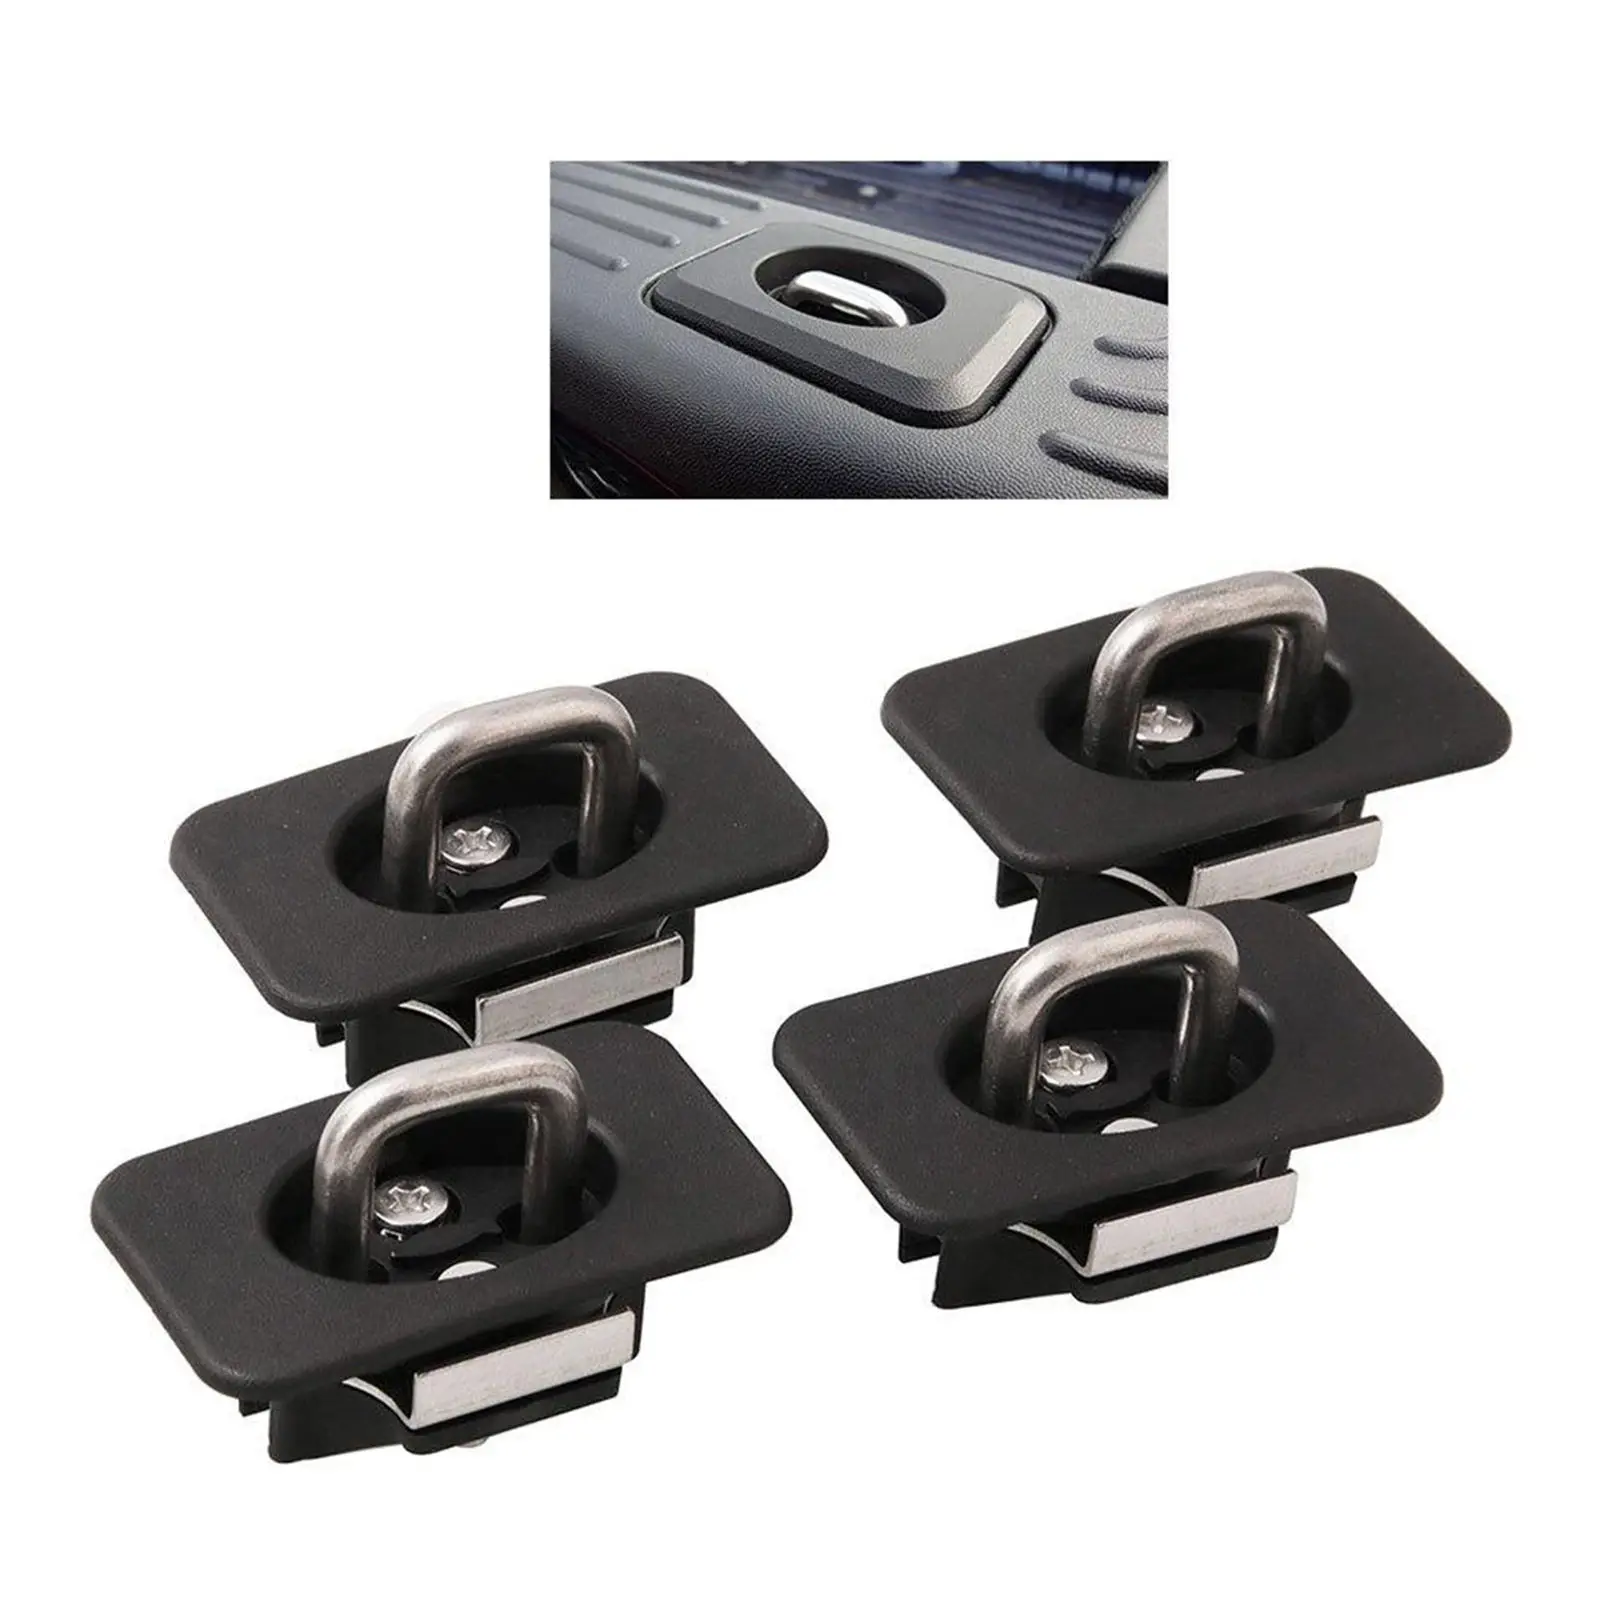 4Pcs Truck Tie-Down Anchor for Ford Raptor F-150 98-14 Car Accessories, Easy to Install